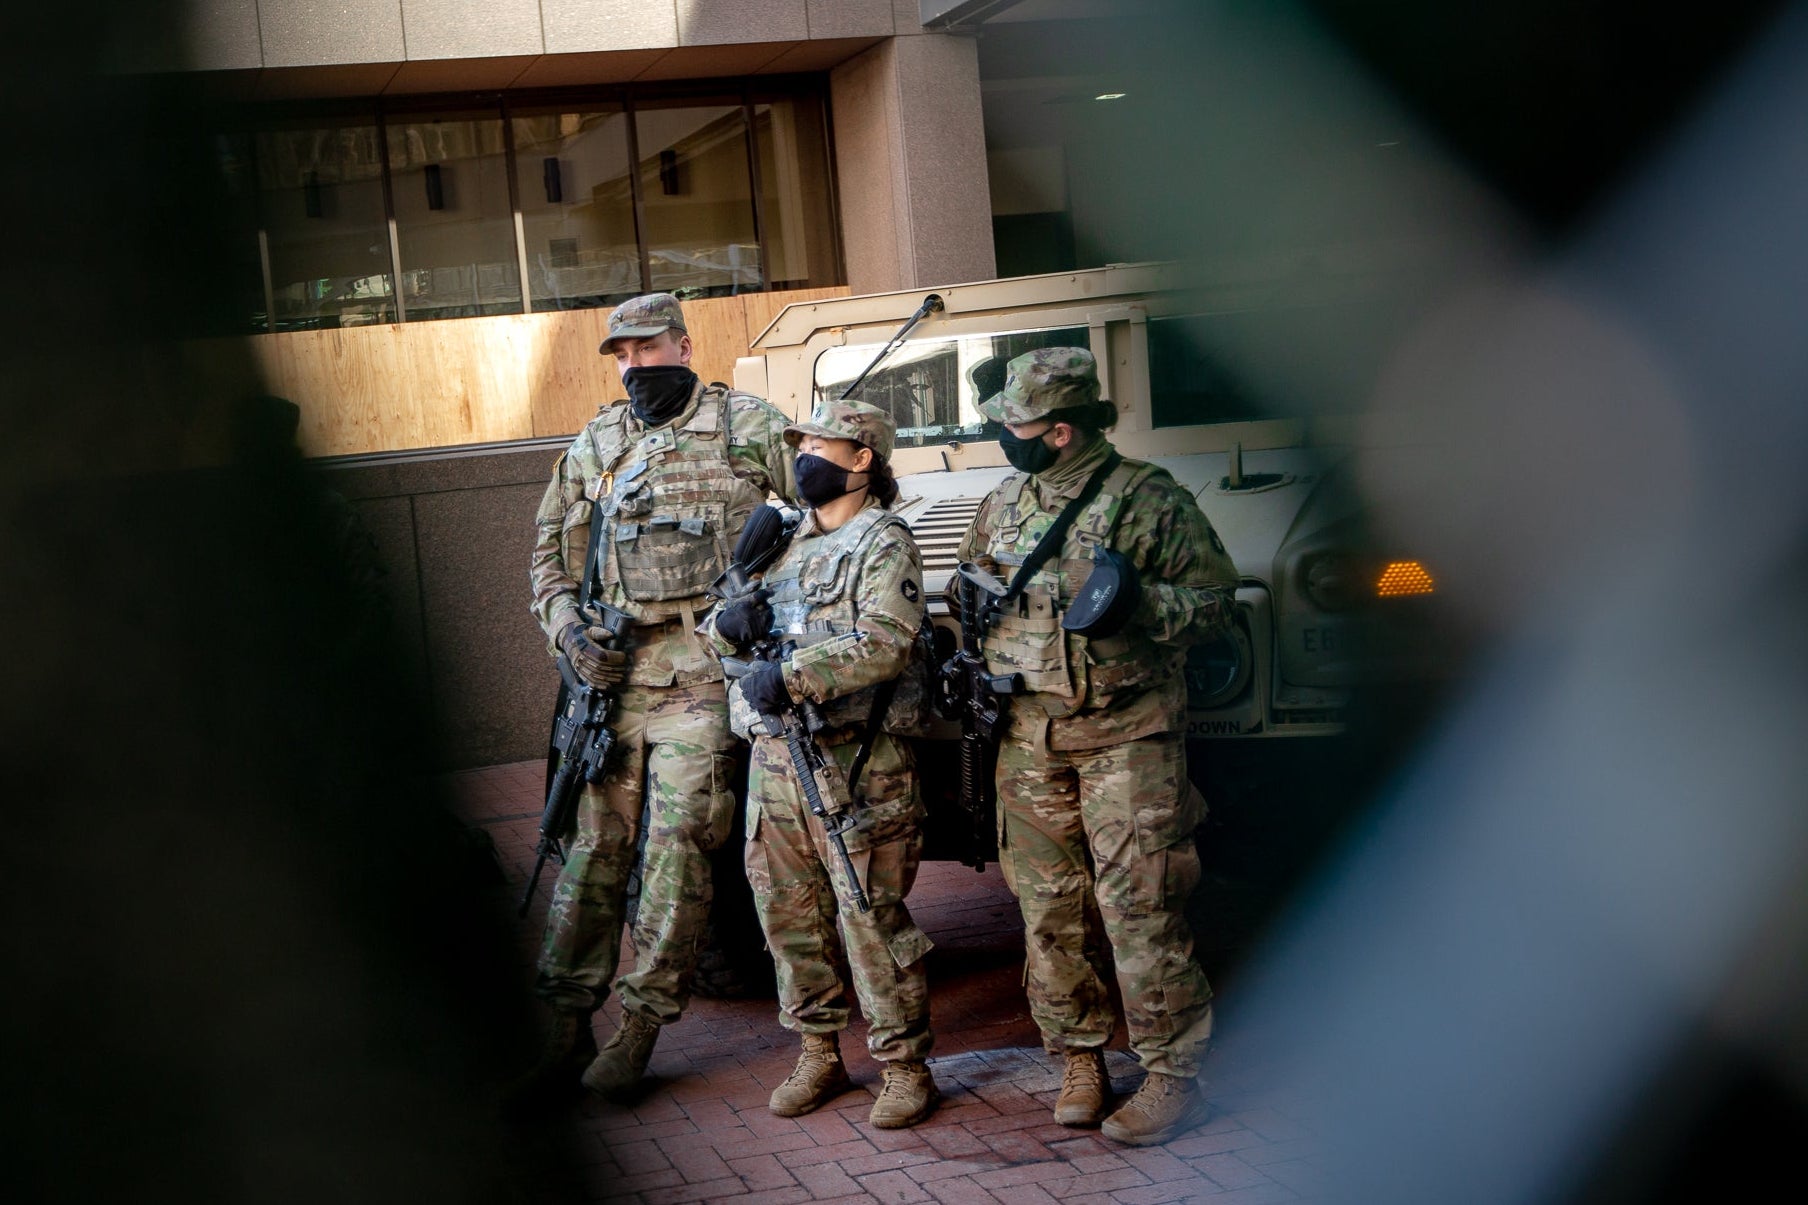 Three National Guard members standing next to an armored vehicle outside the courthouse.